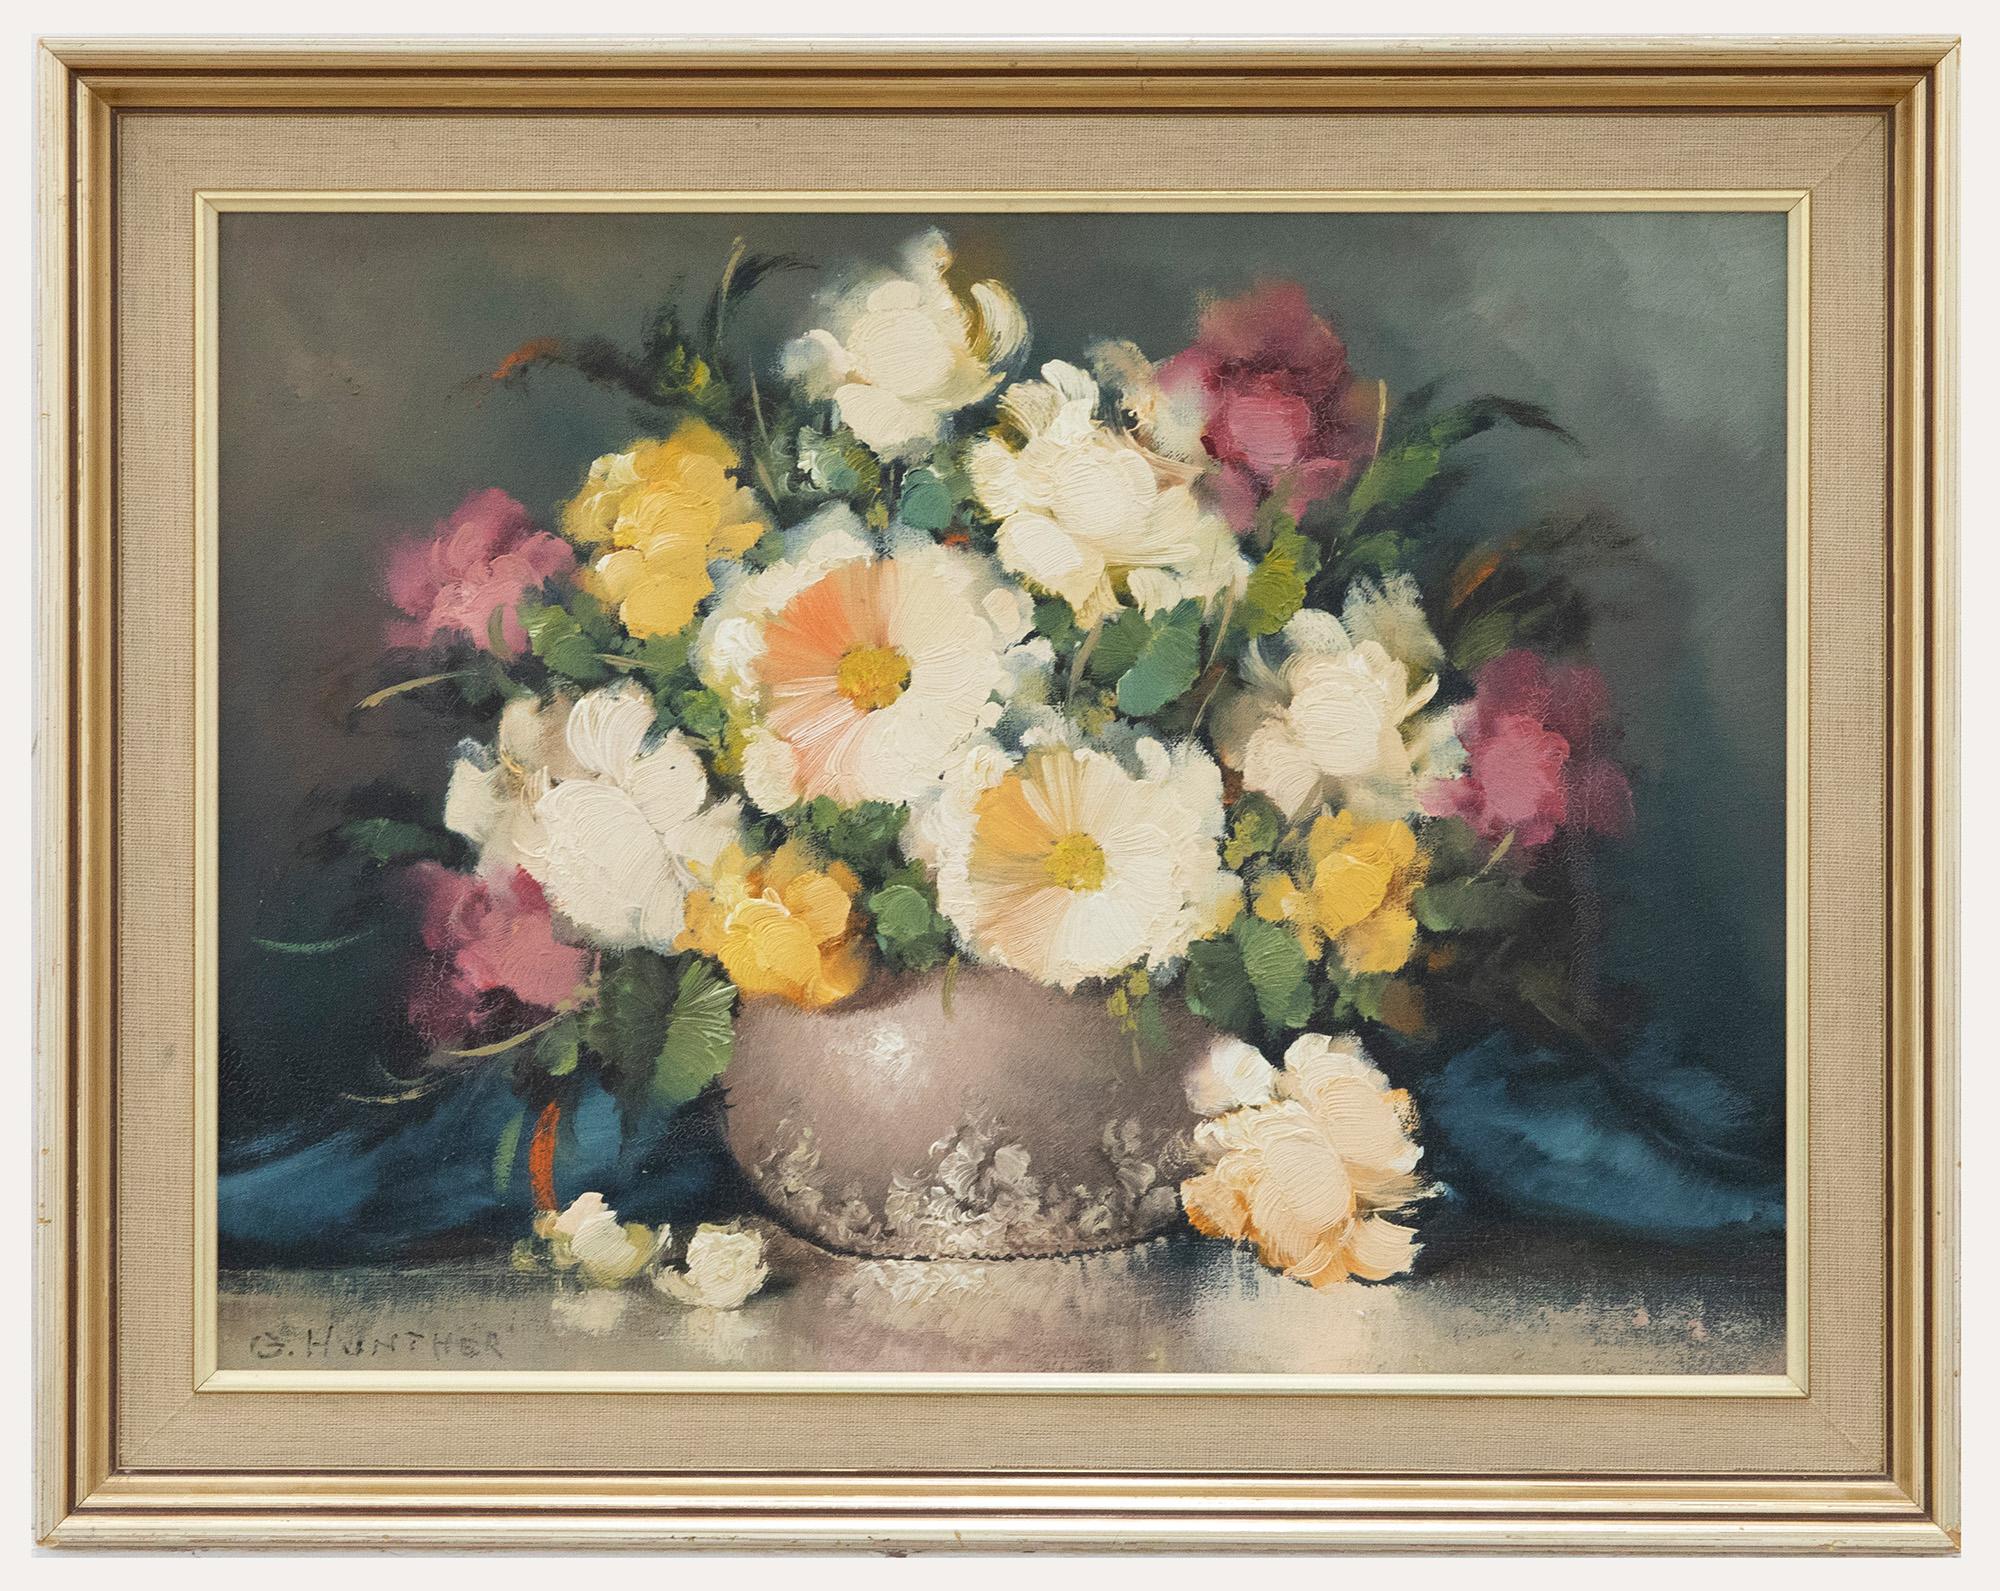 Unknown Still-Life Painting - Framed 20th Century Oil - Flowers in a Vase